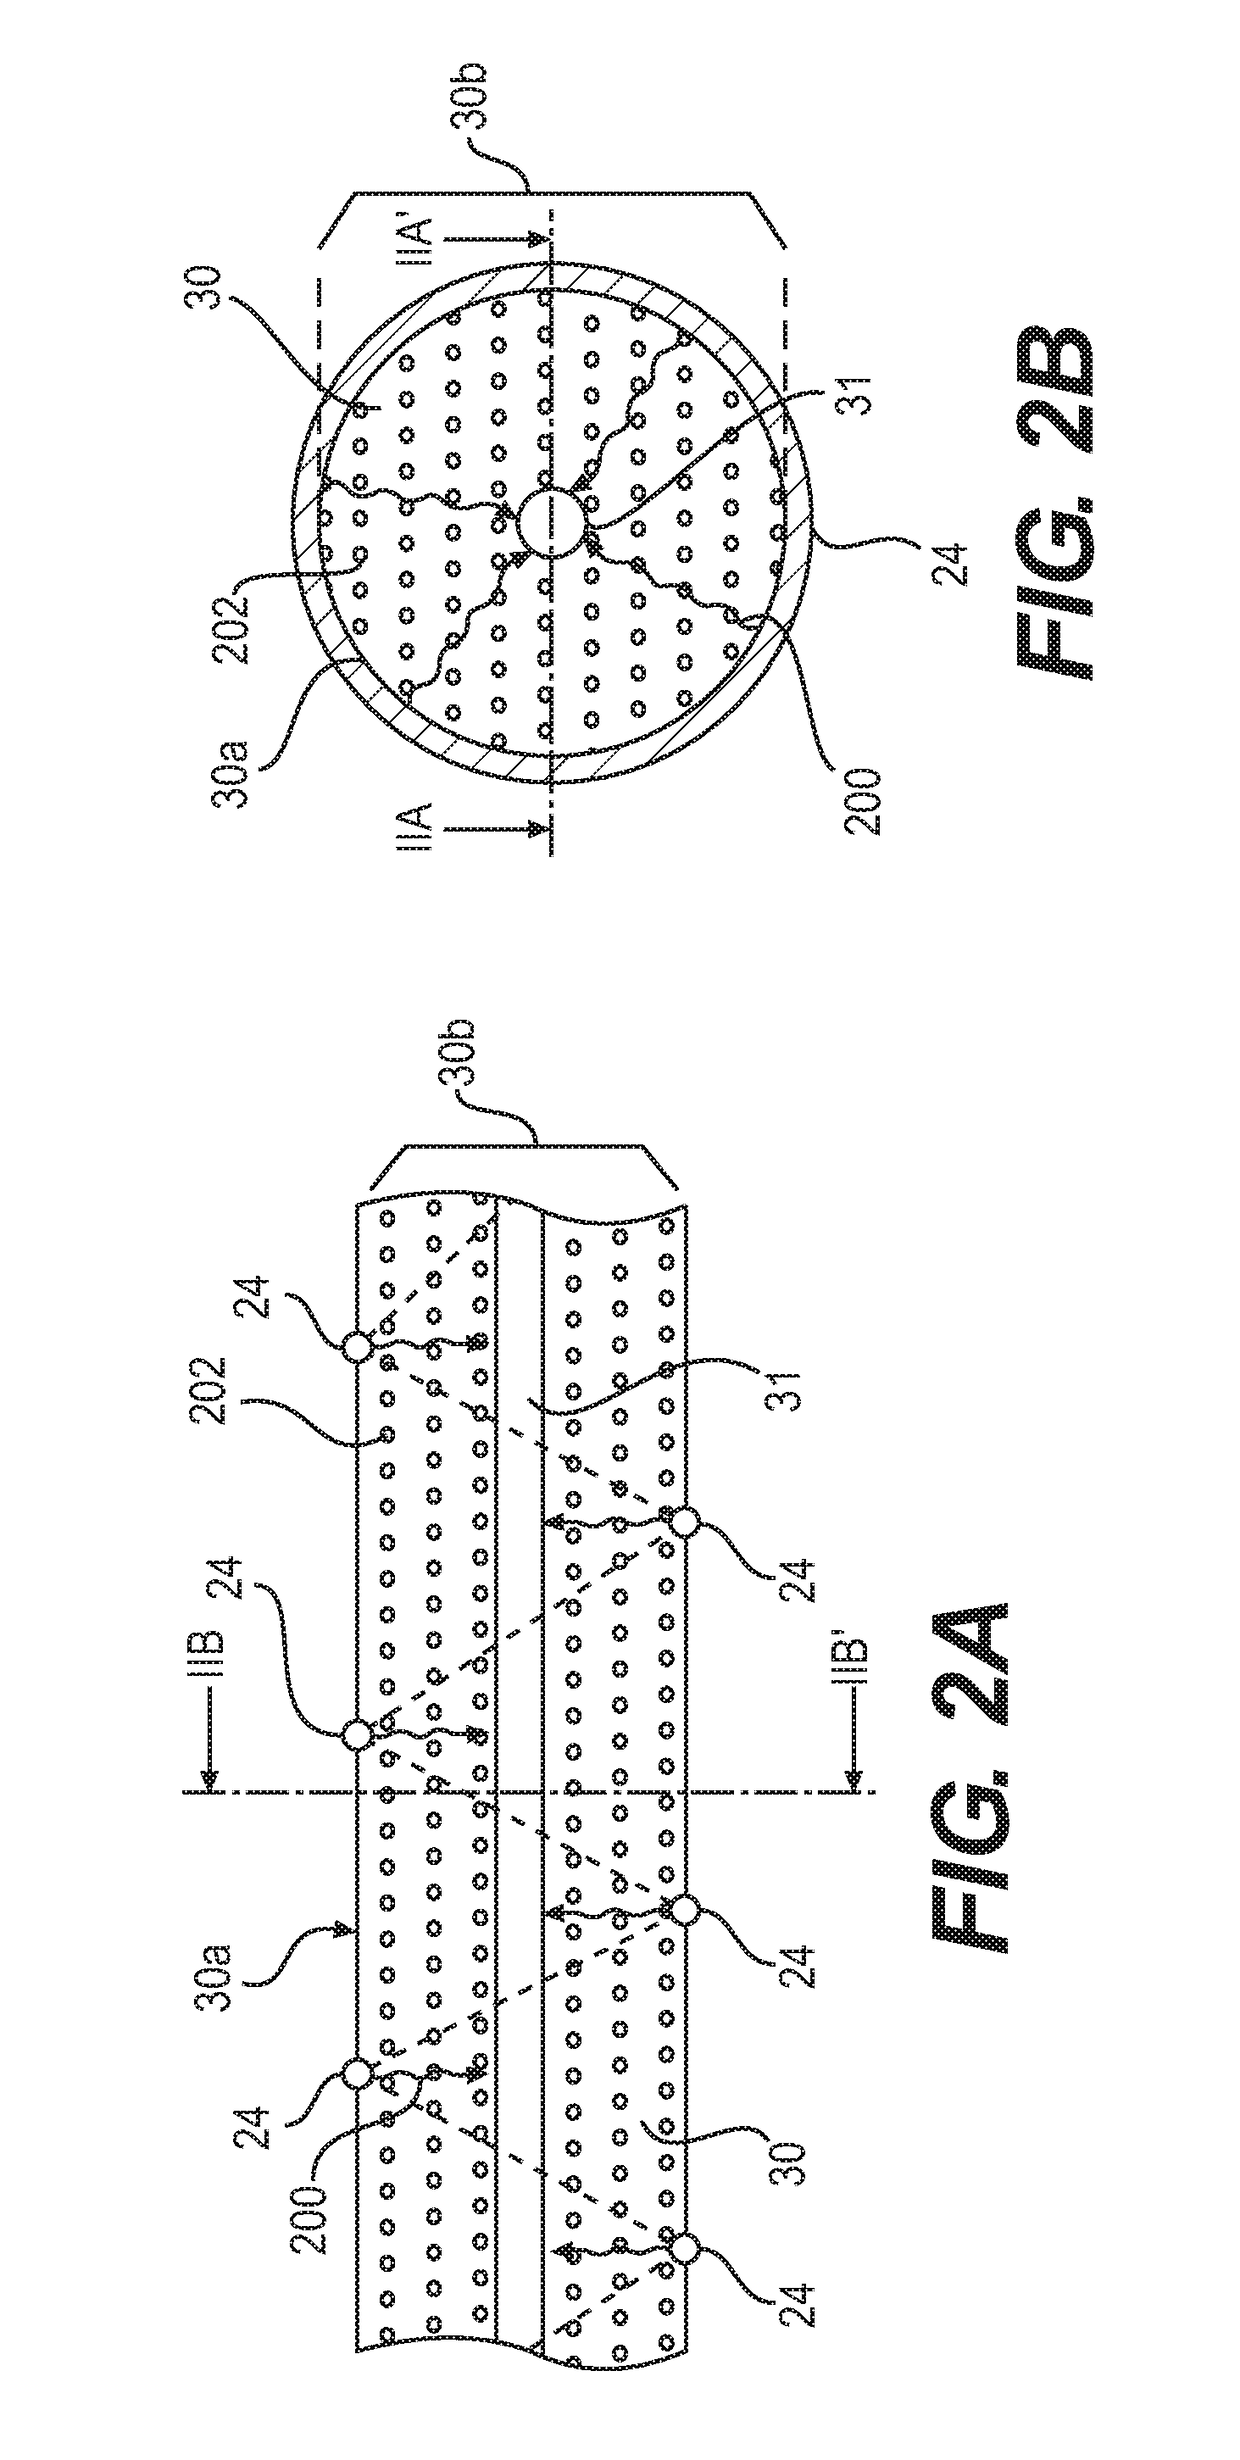 E-vaping device cartridge with internal conductive element